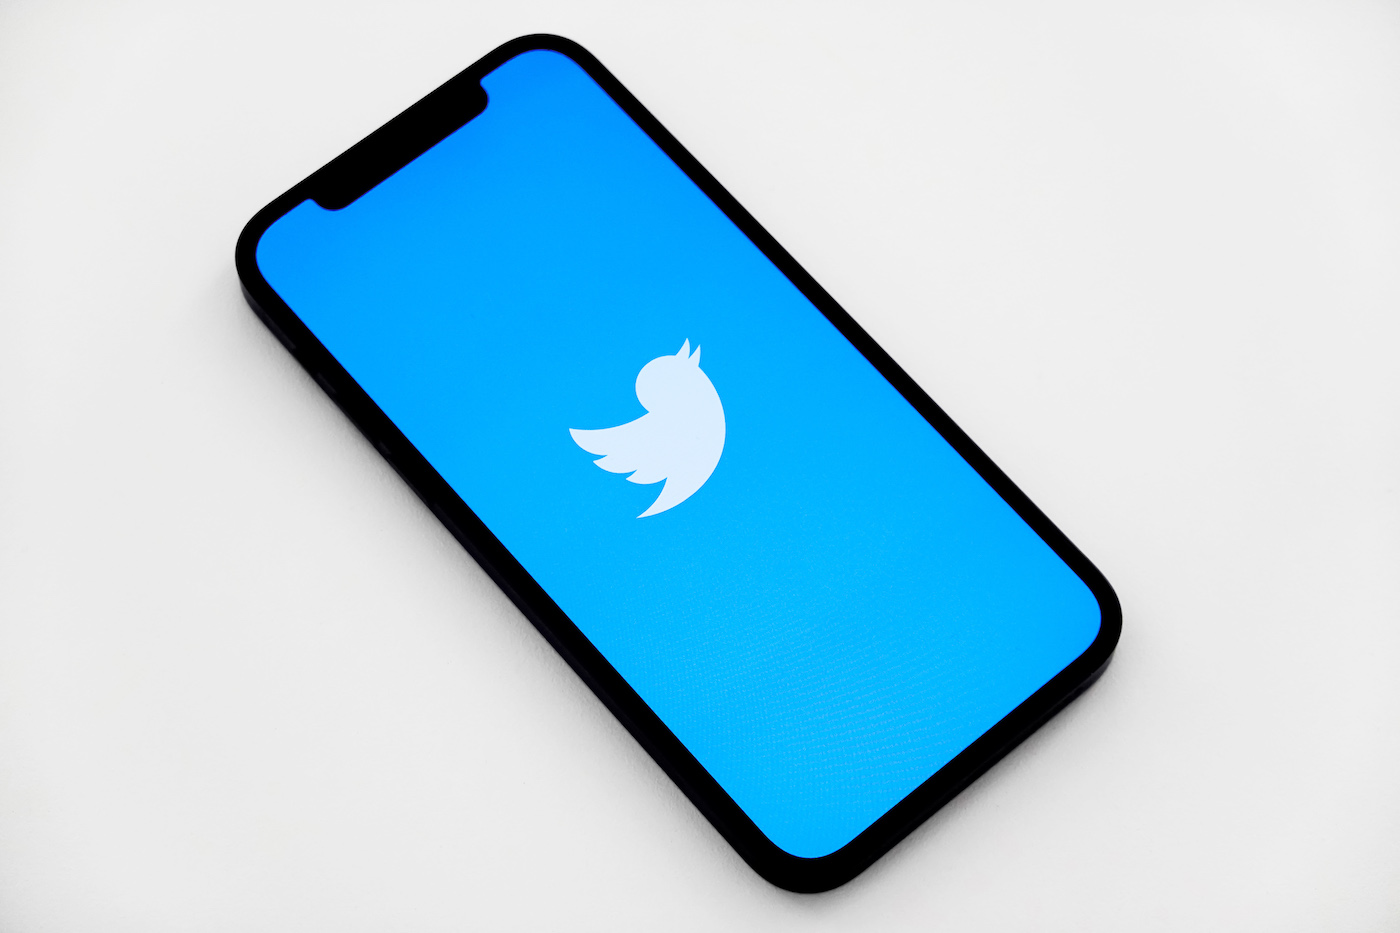 Twitter Blue is now available globally